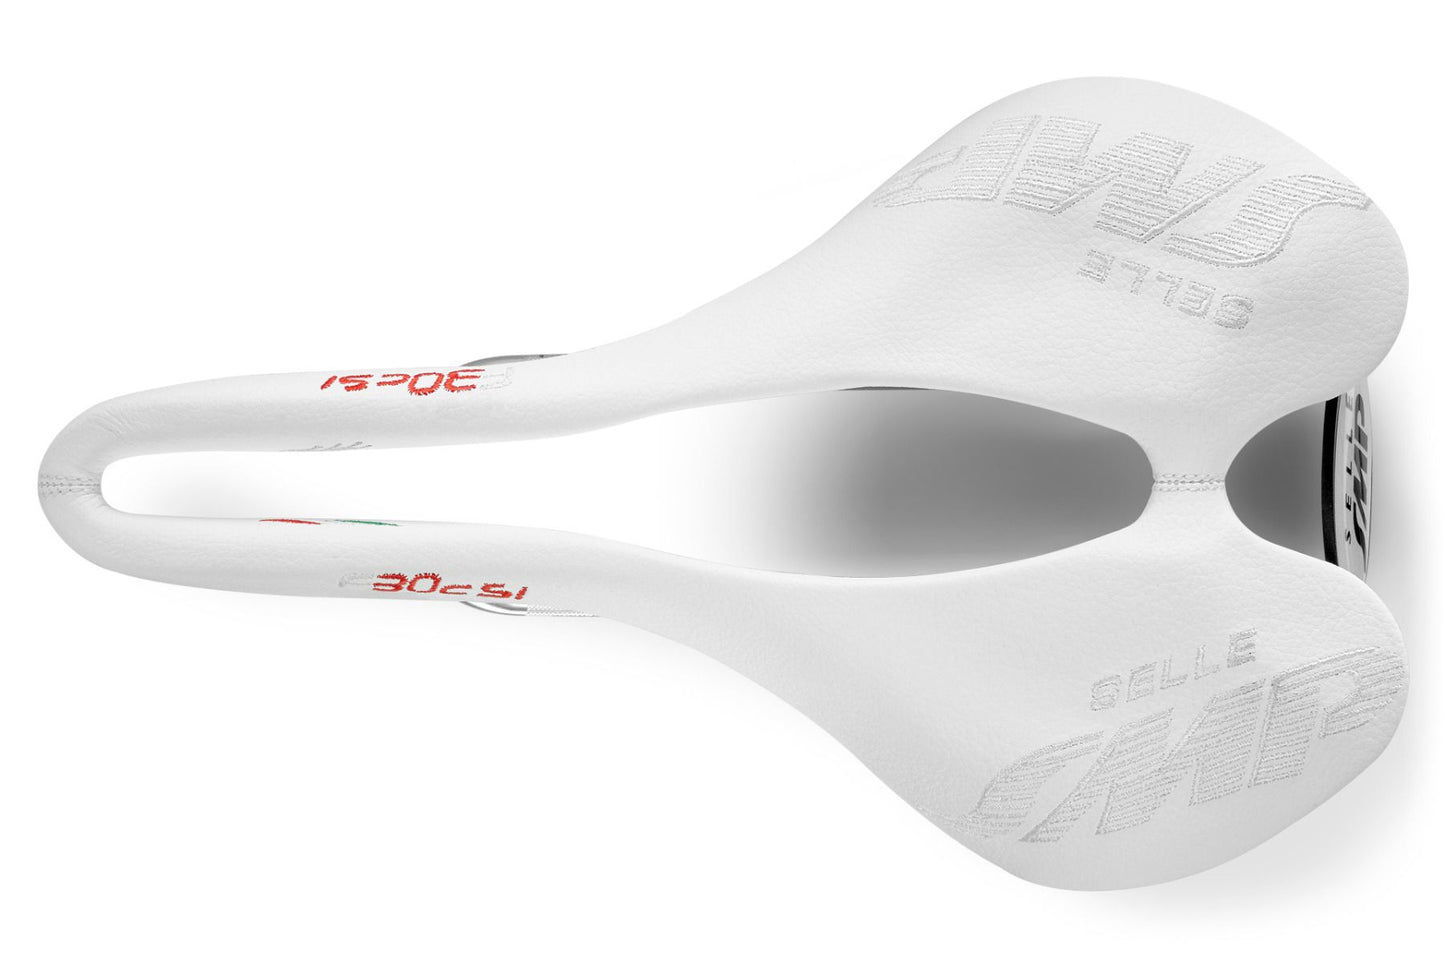 Selle SMP F30C s.i. Bicycle Saddle with Steel Rails (White)